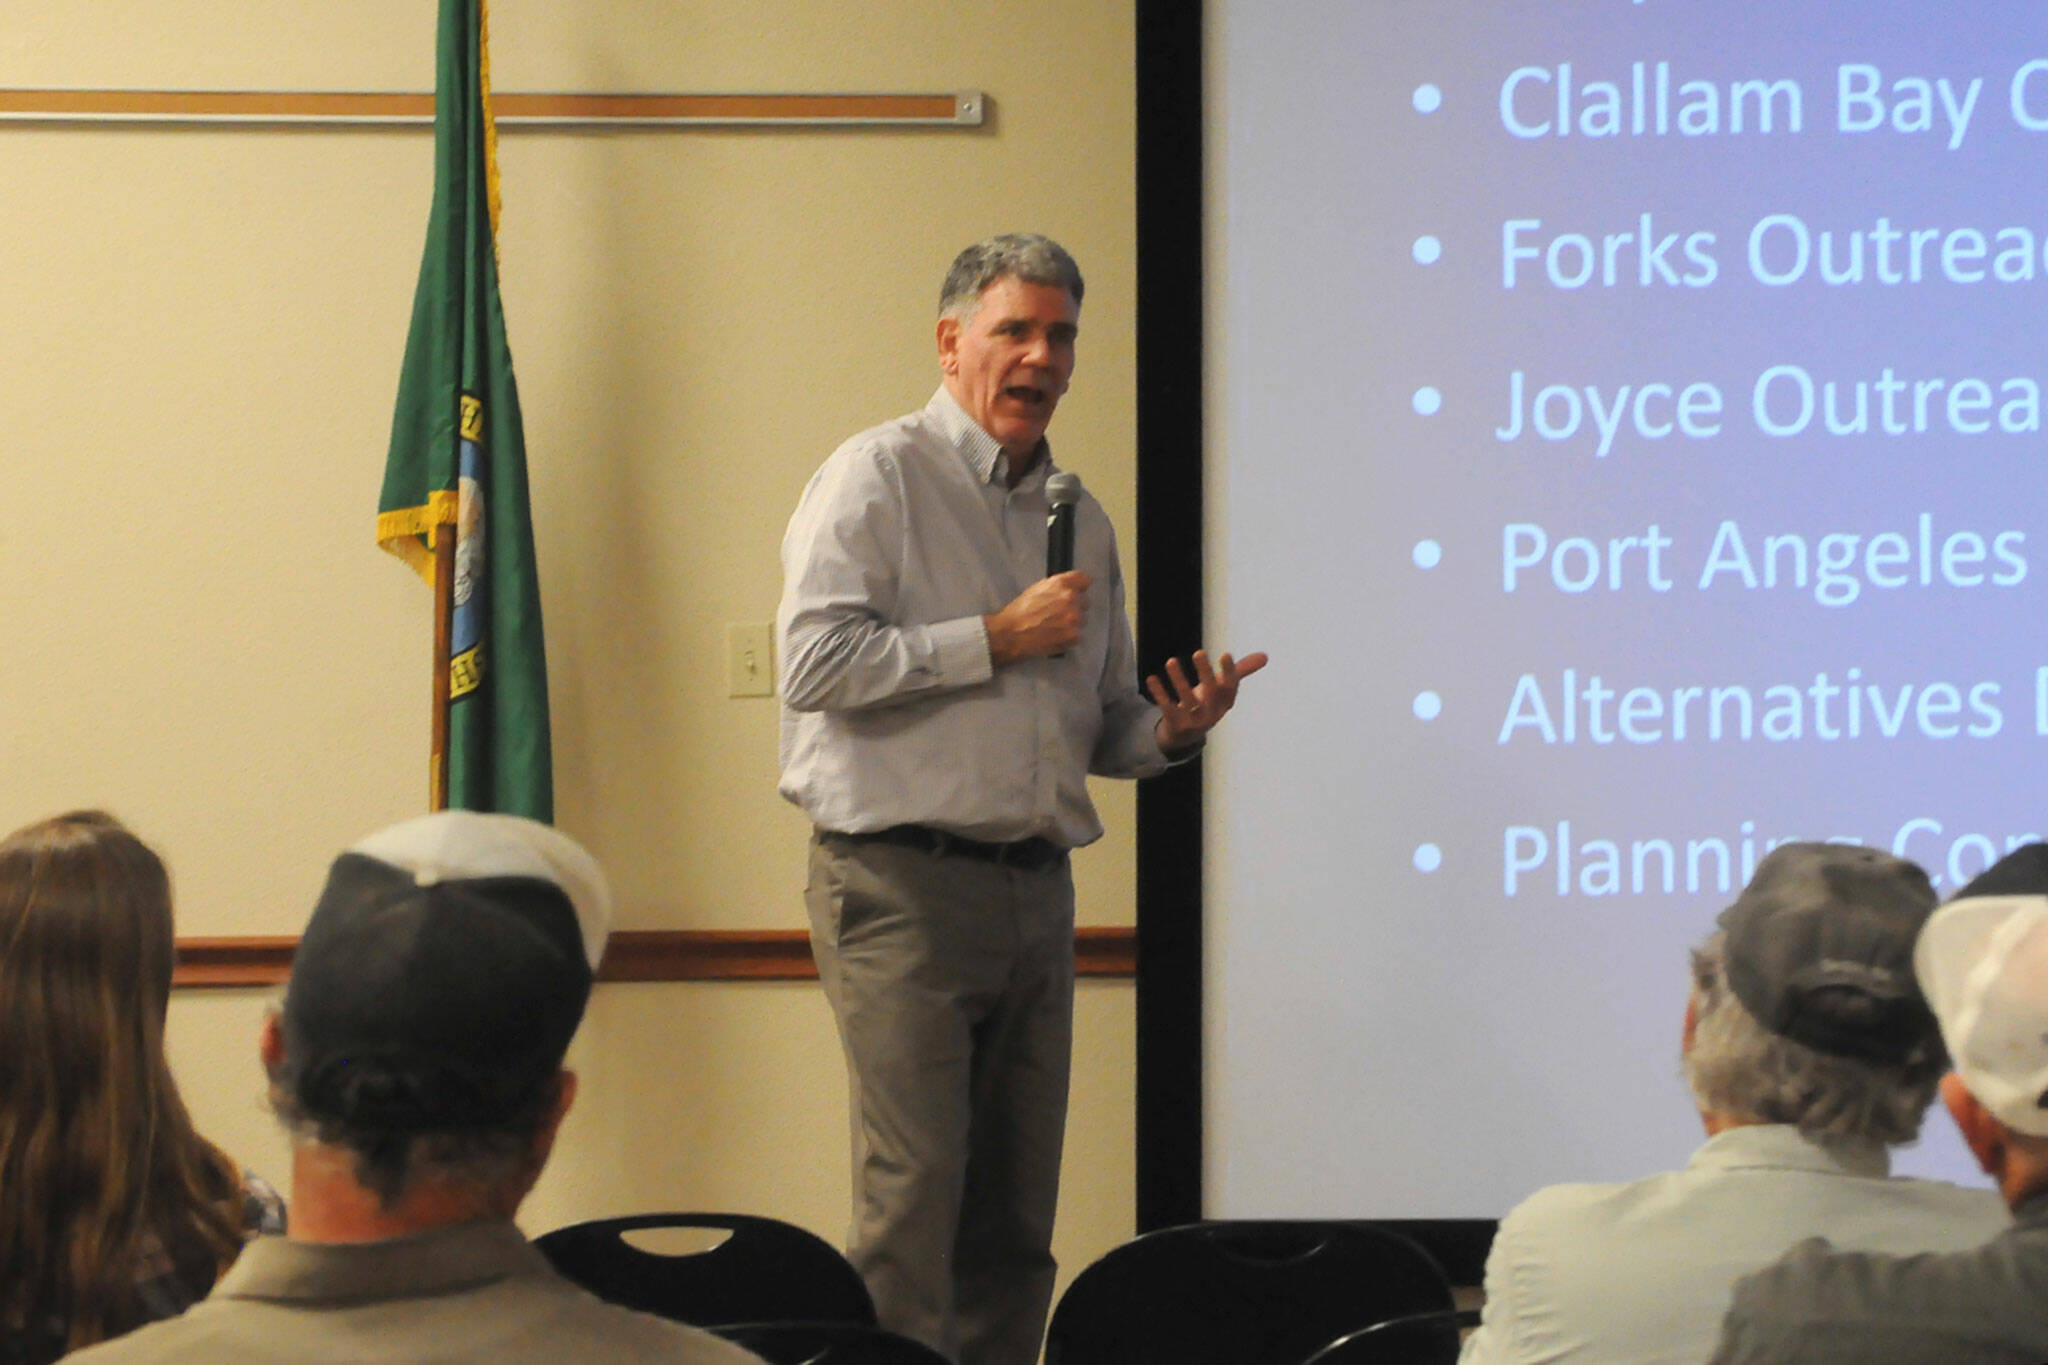 Bruce Emery, Clallam County’s director of Community Development, chats with about 30 farmers on Nov. 7 to seek input on updating the county’s code in order to better help farms come into compliance. “This is going to be cooperative, constructive, and it’s not going to be punitive,” he said. (Matthew Nash/Olympic Peninsula News Group)